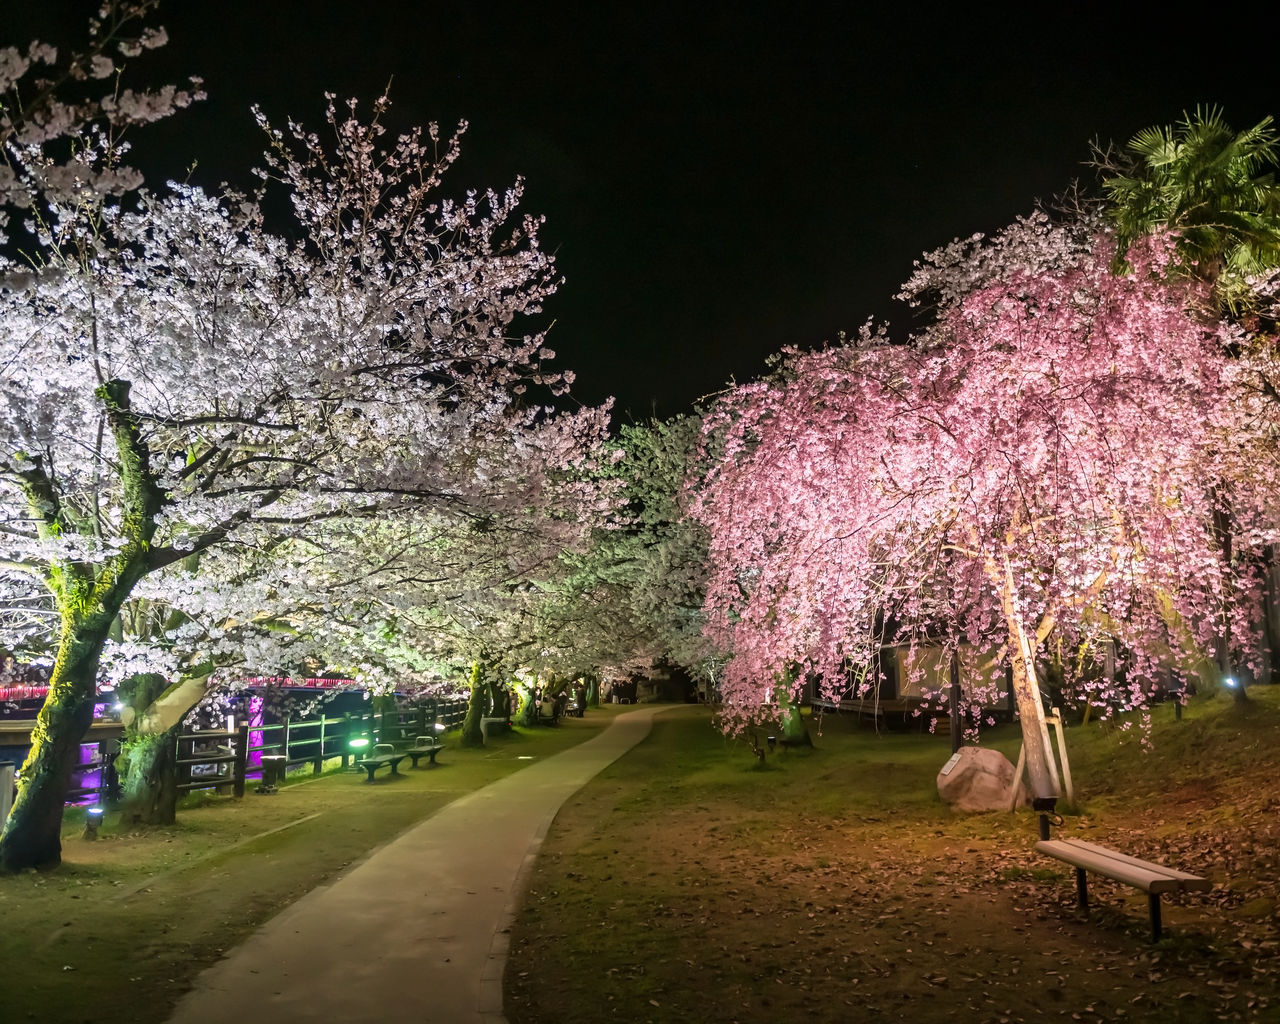 plant, blossom, tree, flower, cherry blossom, flowering plant, springtime, nature, beauty in nature, freshness, branch, growth, fragility, park, cherry tree, park - man made space, spring, pink, night, no people, outdoors, leaf, sky, transportation, illuminated, road, footpath, green, grass, city